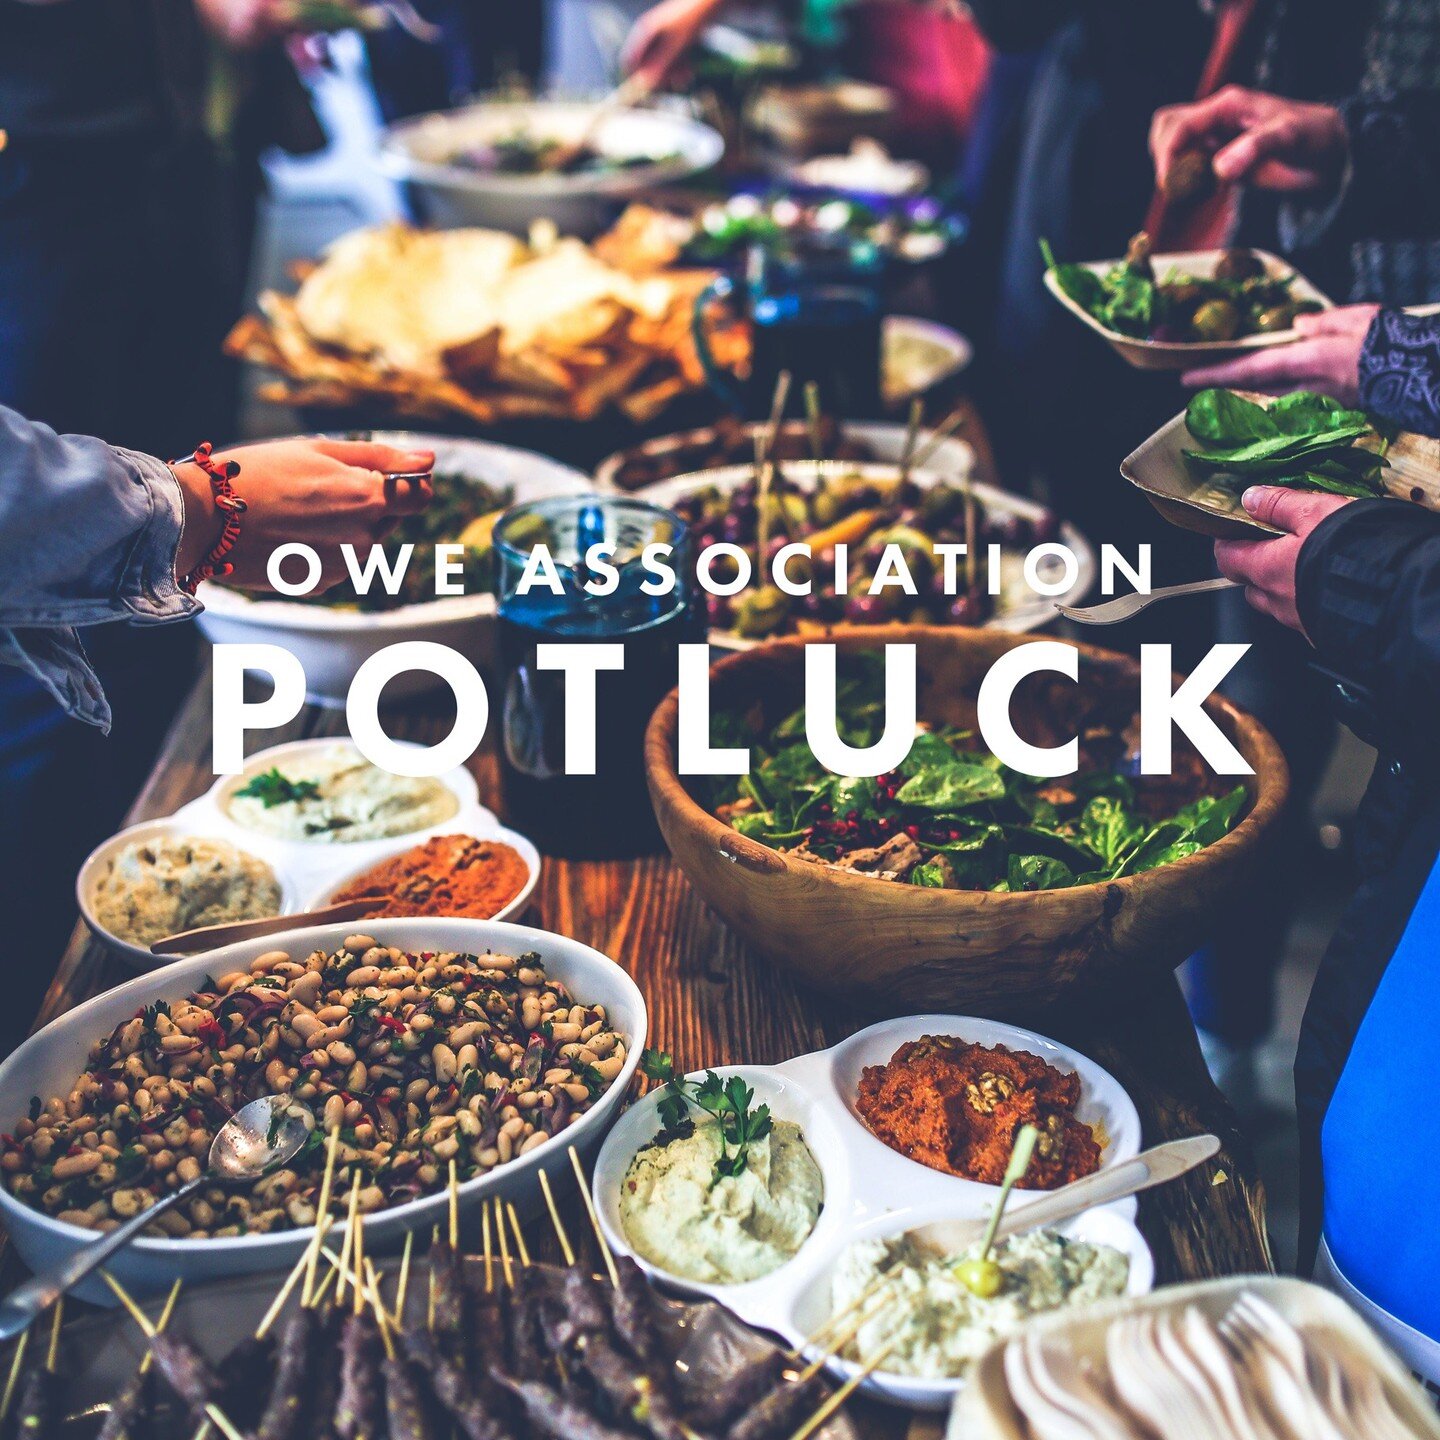 OWE Association Holiday Potluck
Tuesday, December 19, 2023
7:00 PM
Ford Mansion, 2205 Collingwood Blvd. Bring a side dish to share! All neighbors are welcome! Please join us.